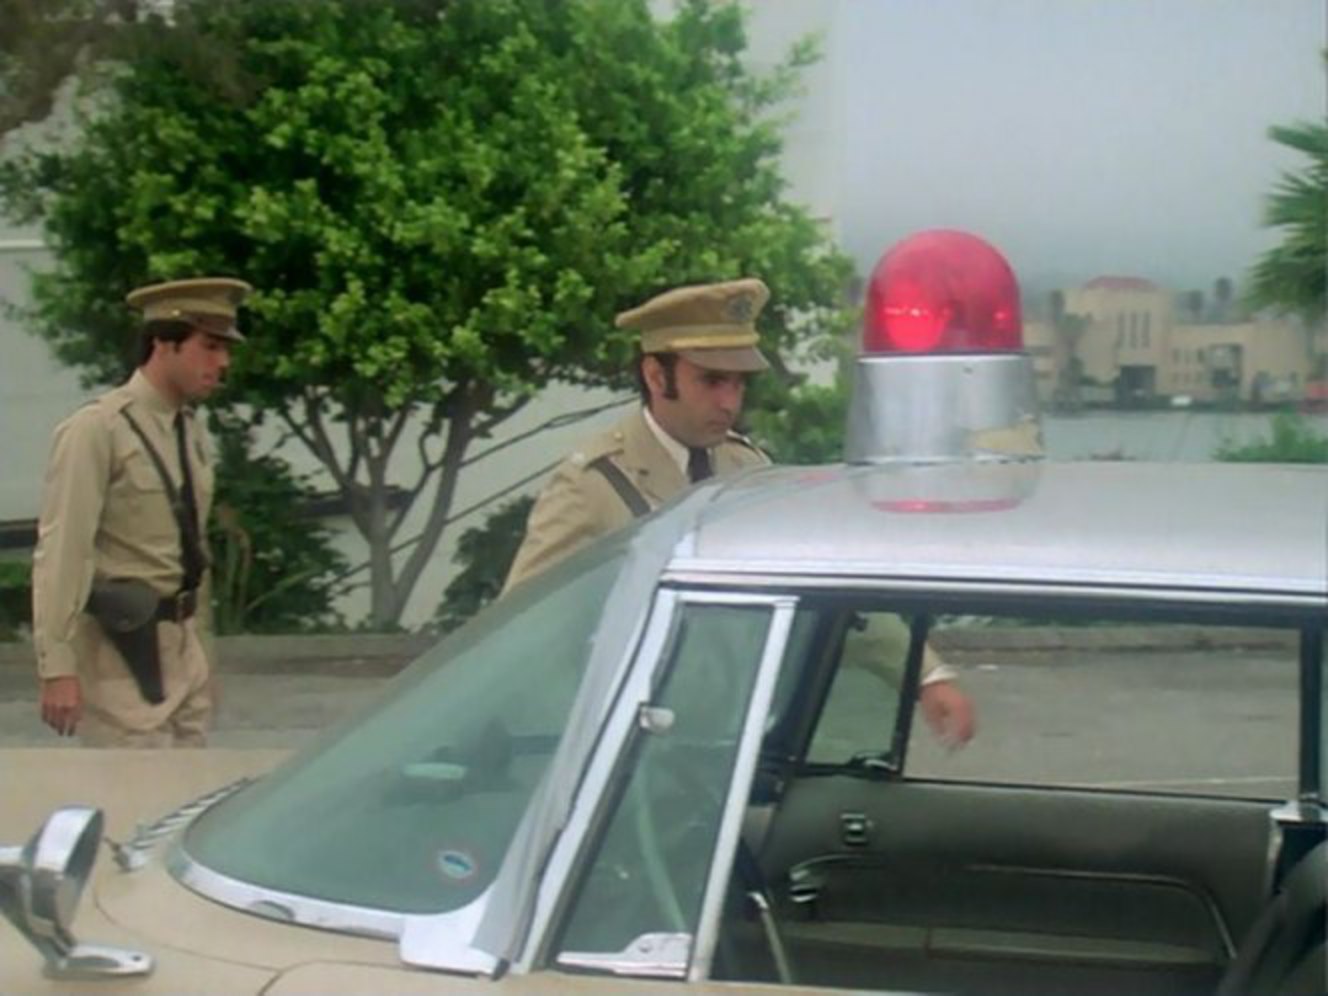 IMCDb.org: 1959 Imperial unknown in "The Bionic Woman, 1976-